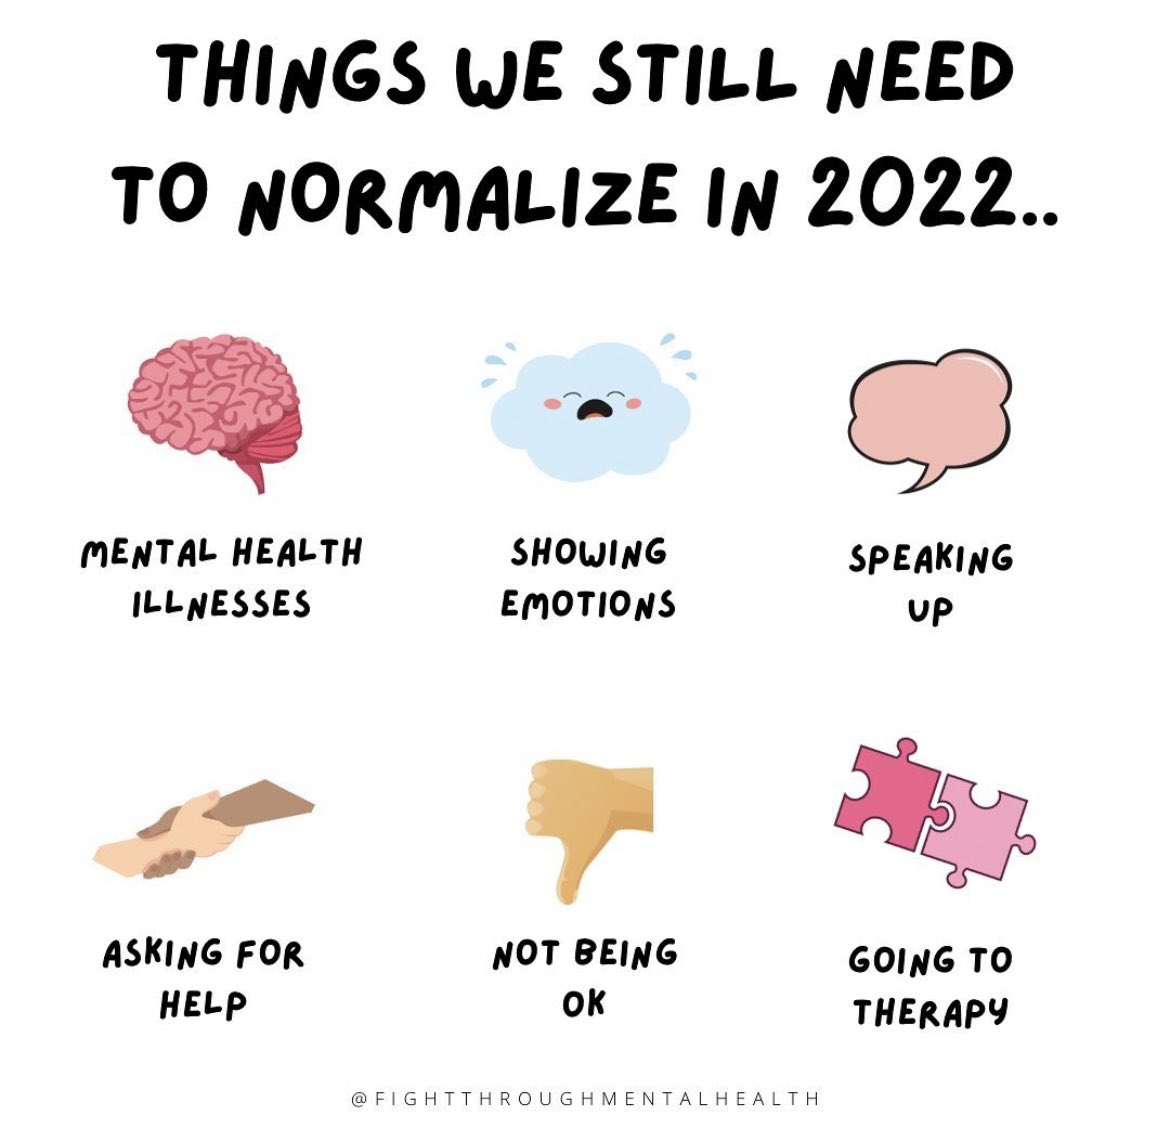 Make your Mental Health Matter this year. What would you like to normalize in 2022? Comment below. 🧠⬇️
#showupforyourself #BeKindToYourMind #Mindfulness #2022 #selfcarecheck #SADAG #mentalhealthforall #everydayisanewday